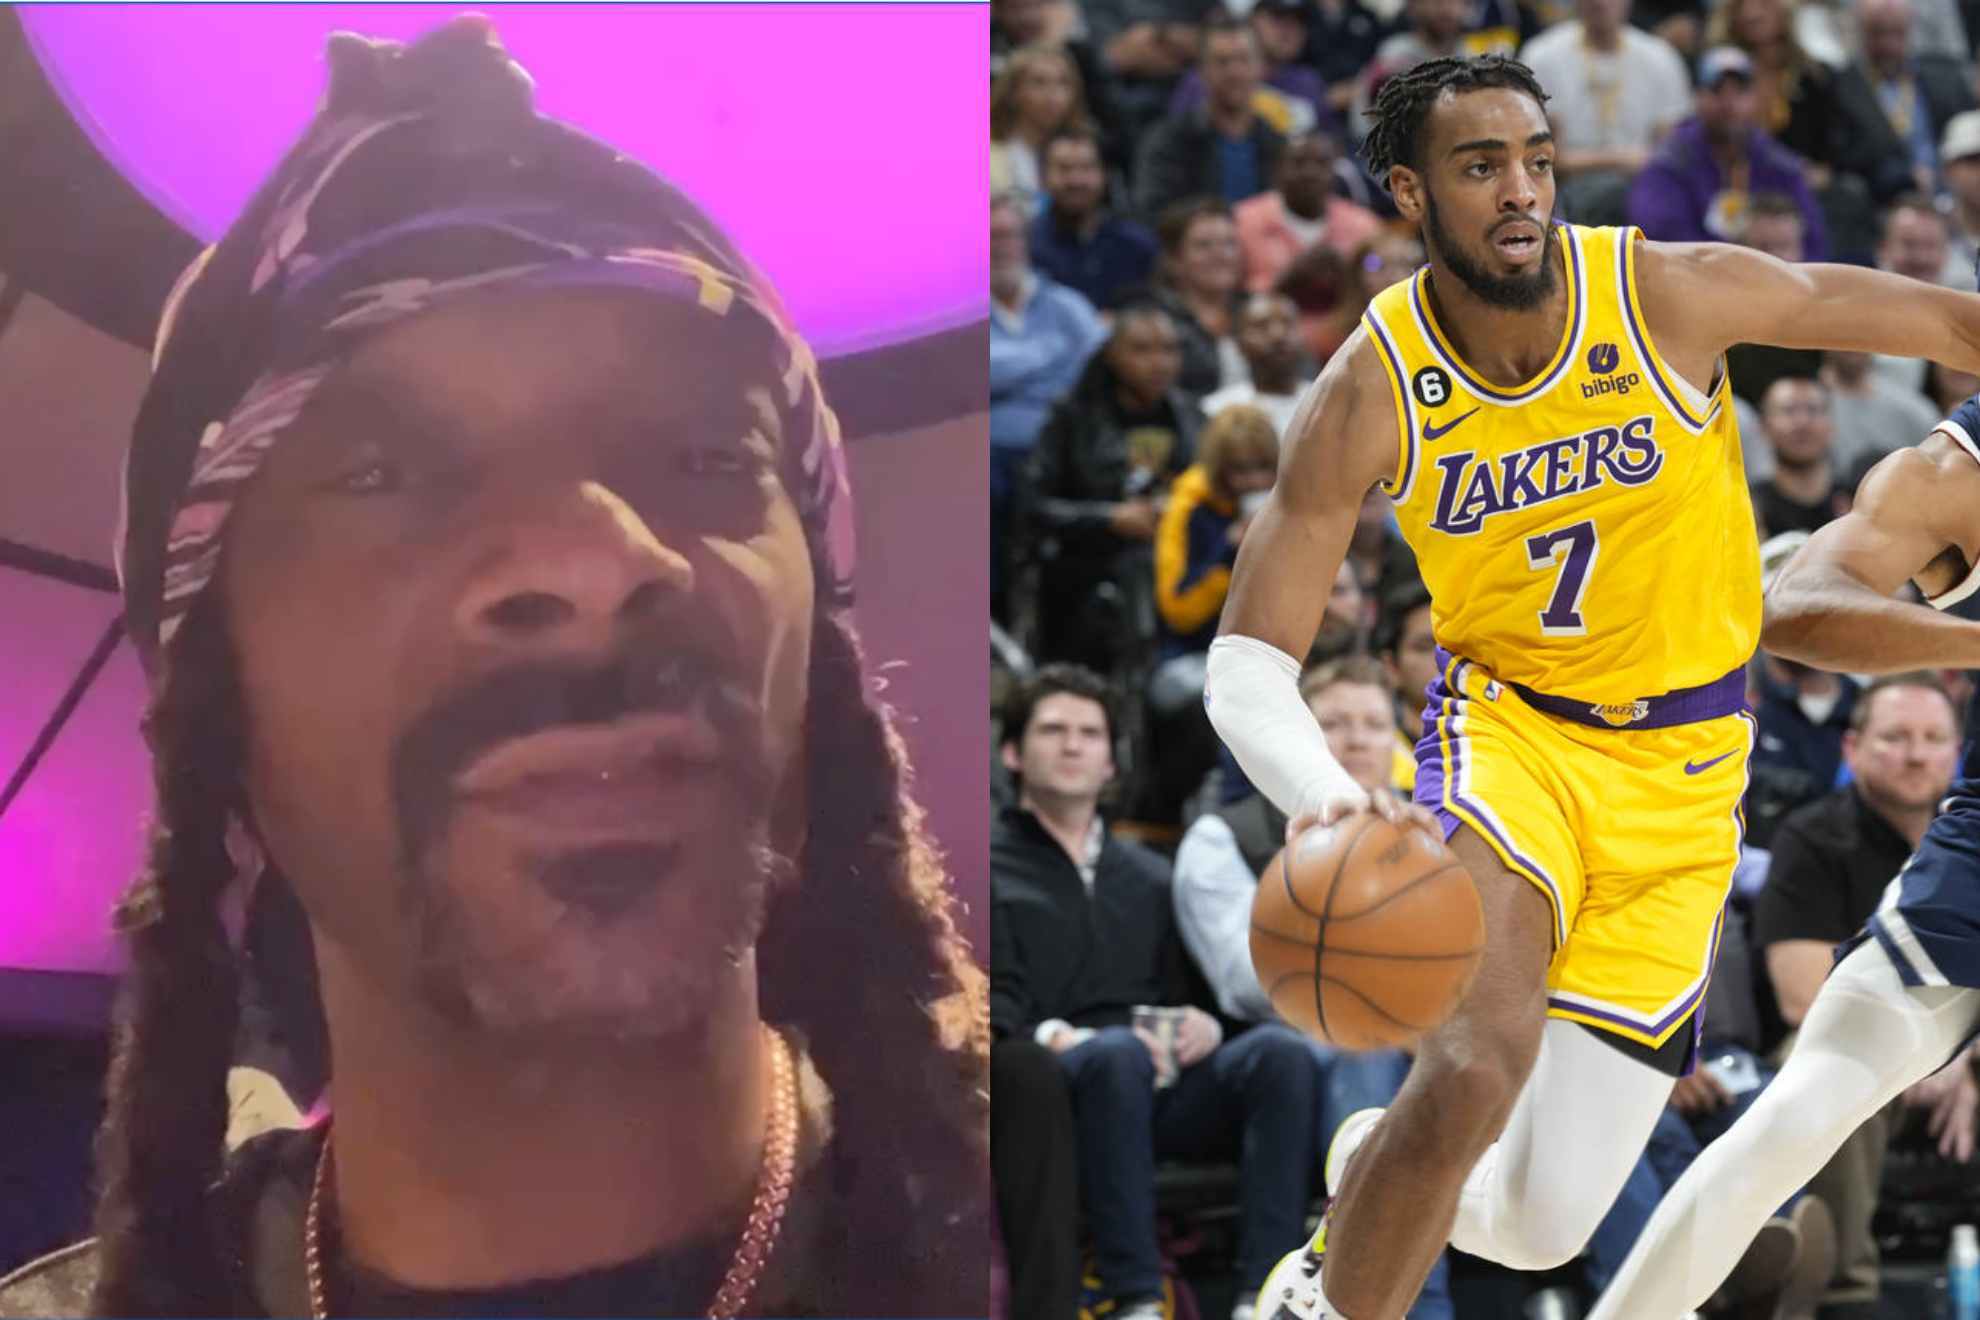 Snoop Dogg trashed the Lakers after their loss in Memphis, taking aim in particular at Troy Brown Jr. (right).